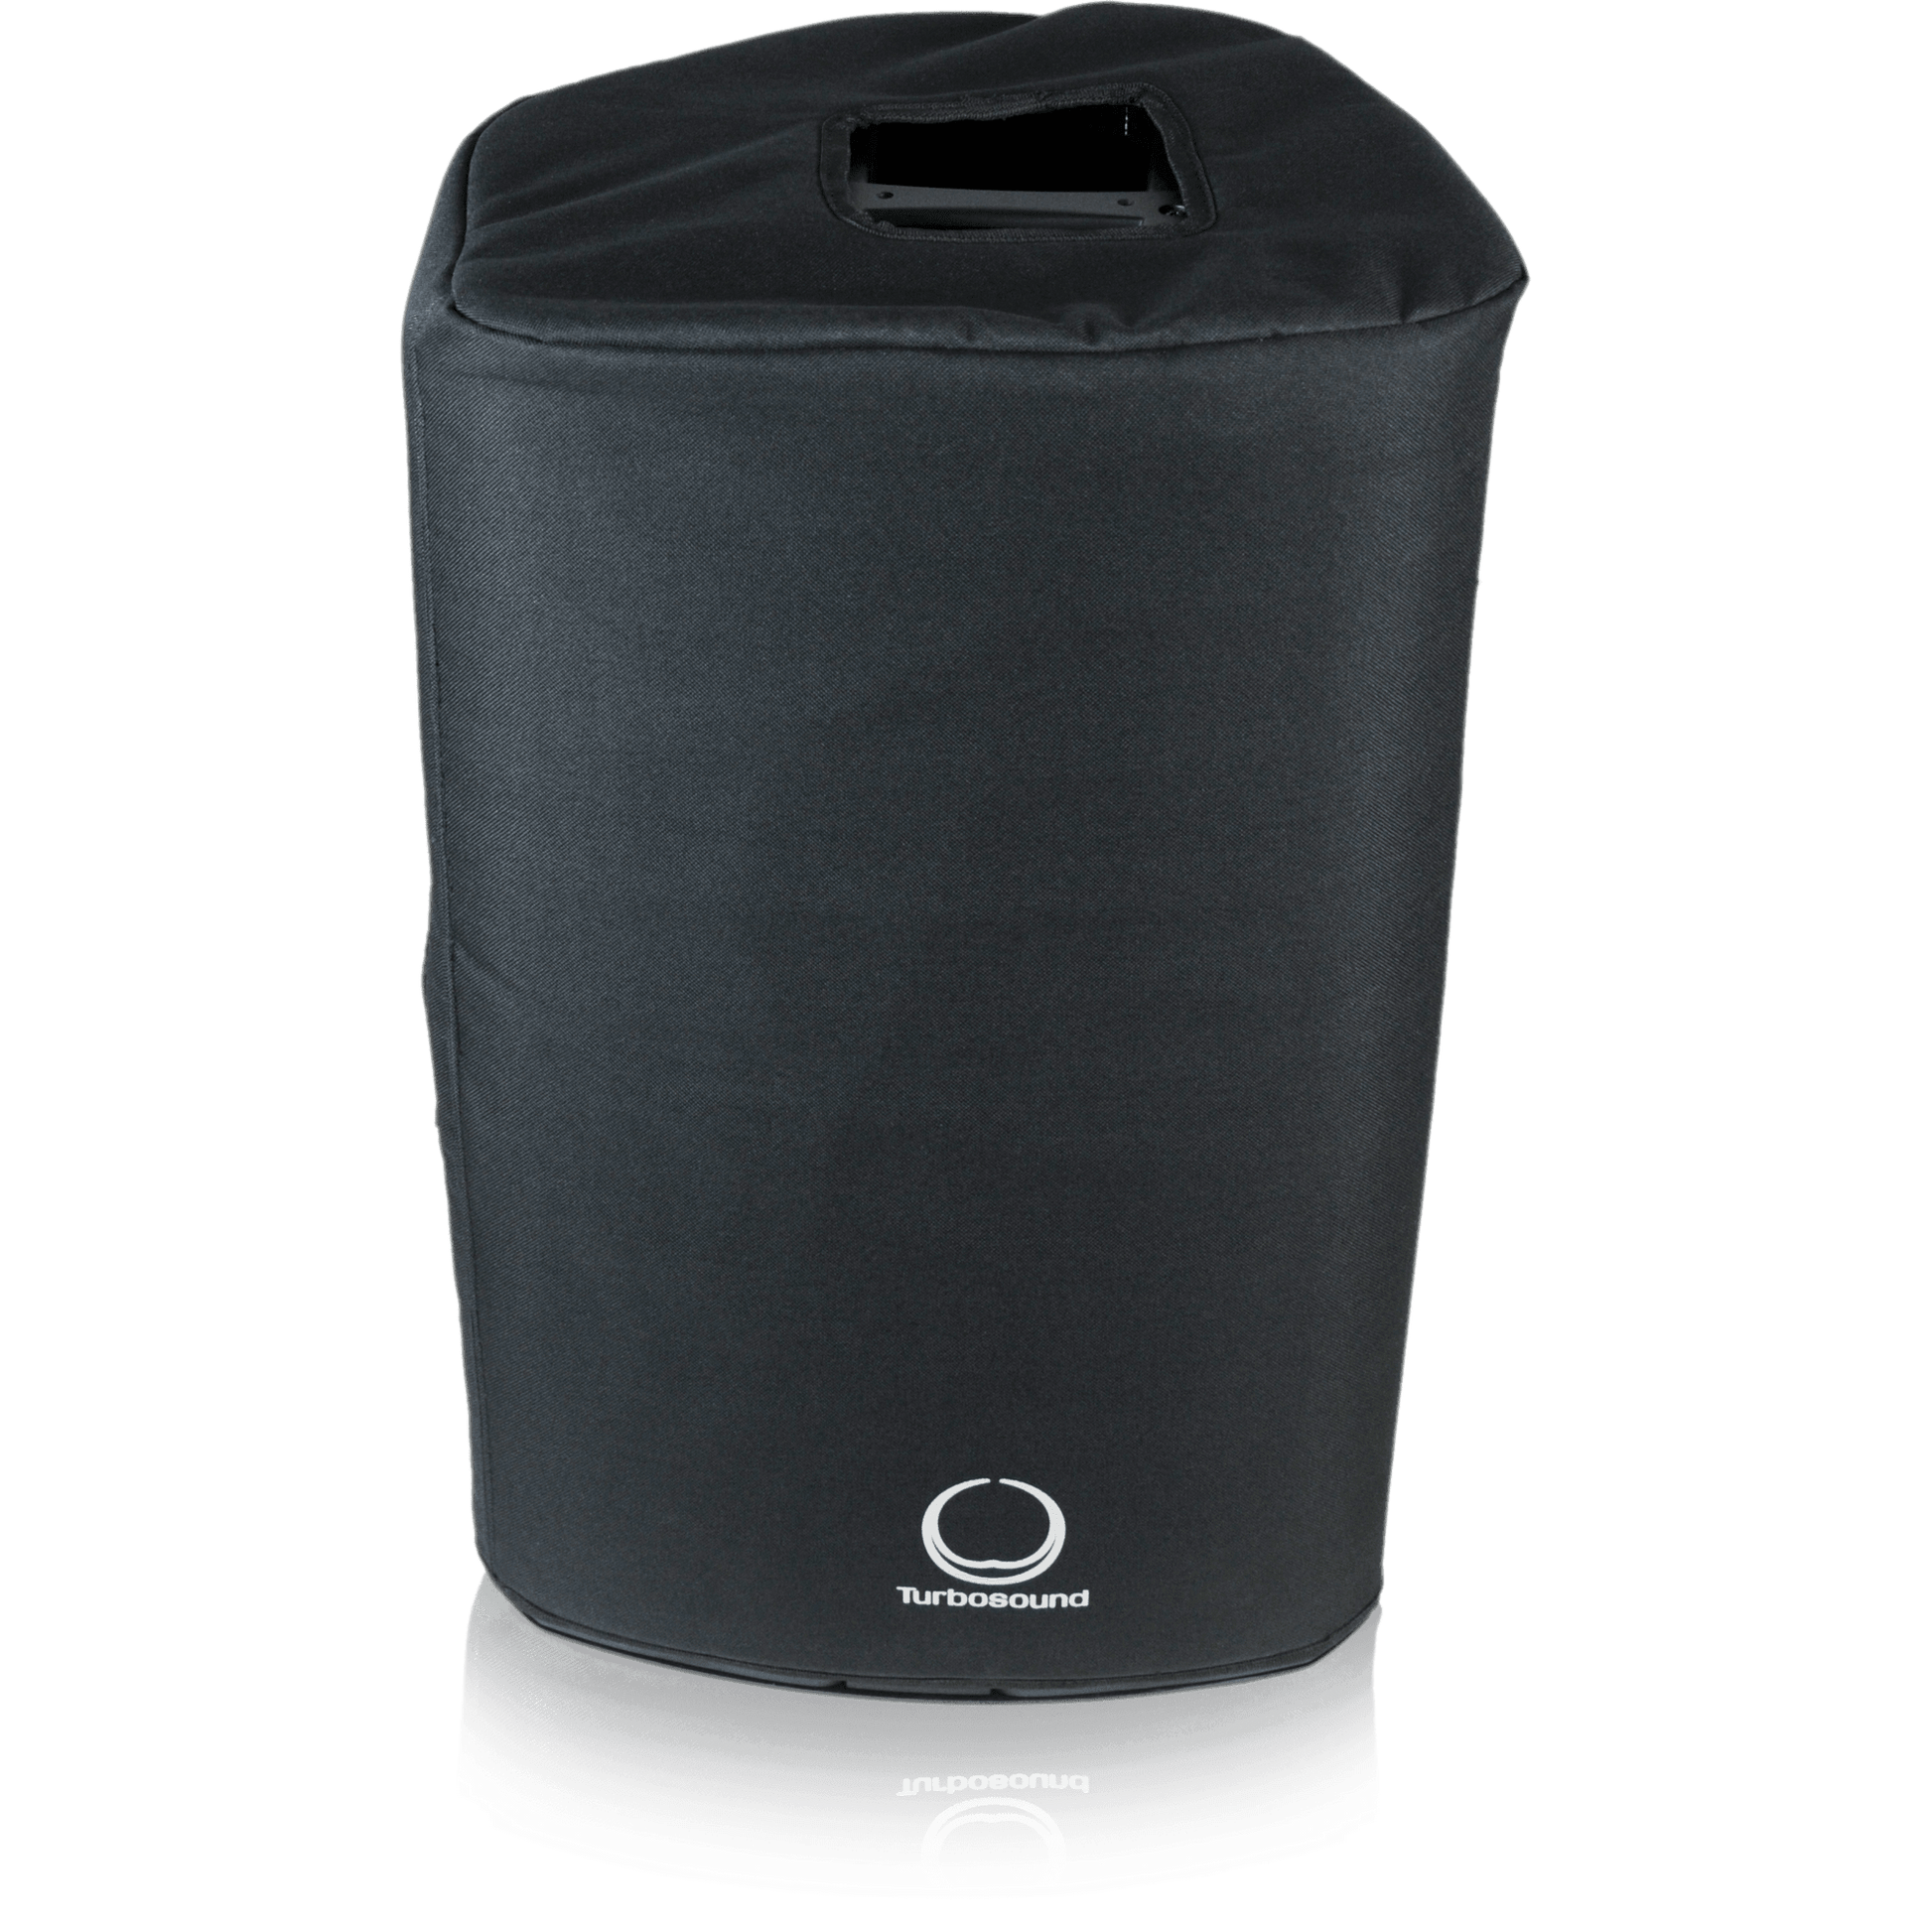 Turbosound TS-PC12-1	Deluxe Water Resistant Protective Cover for 12" Loudspeakers, including iQ12 and iX12